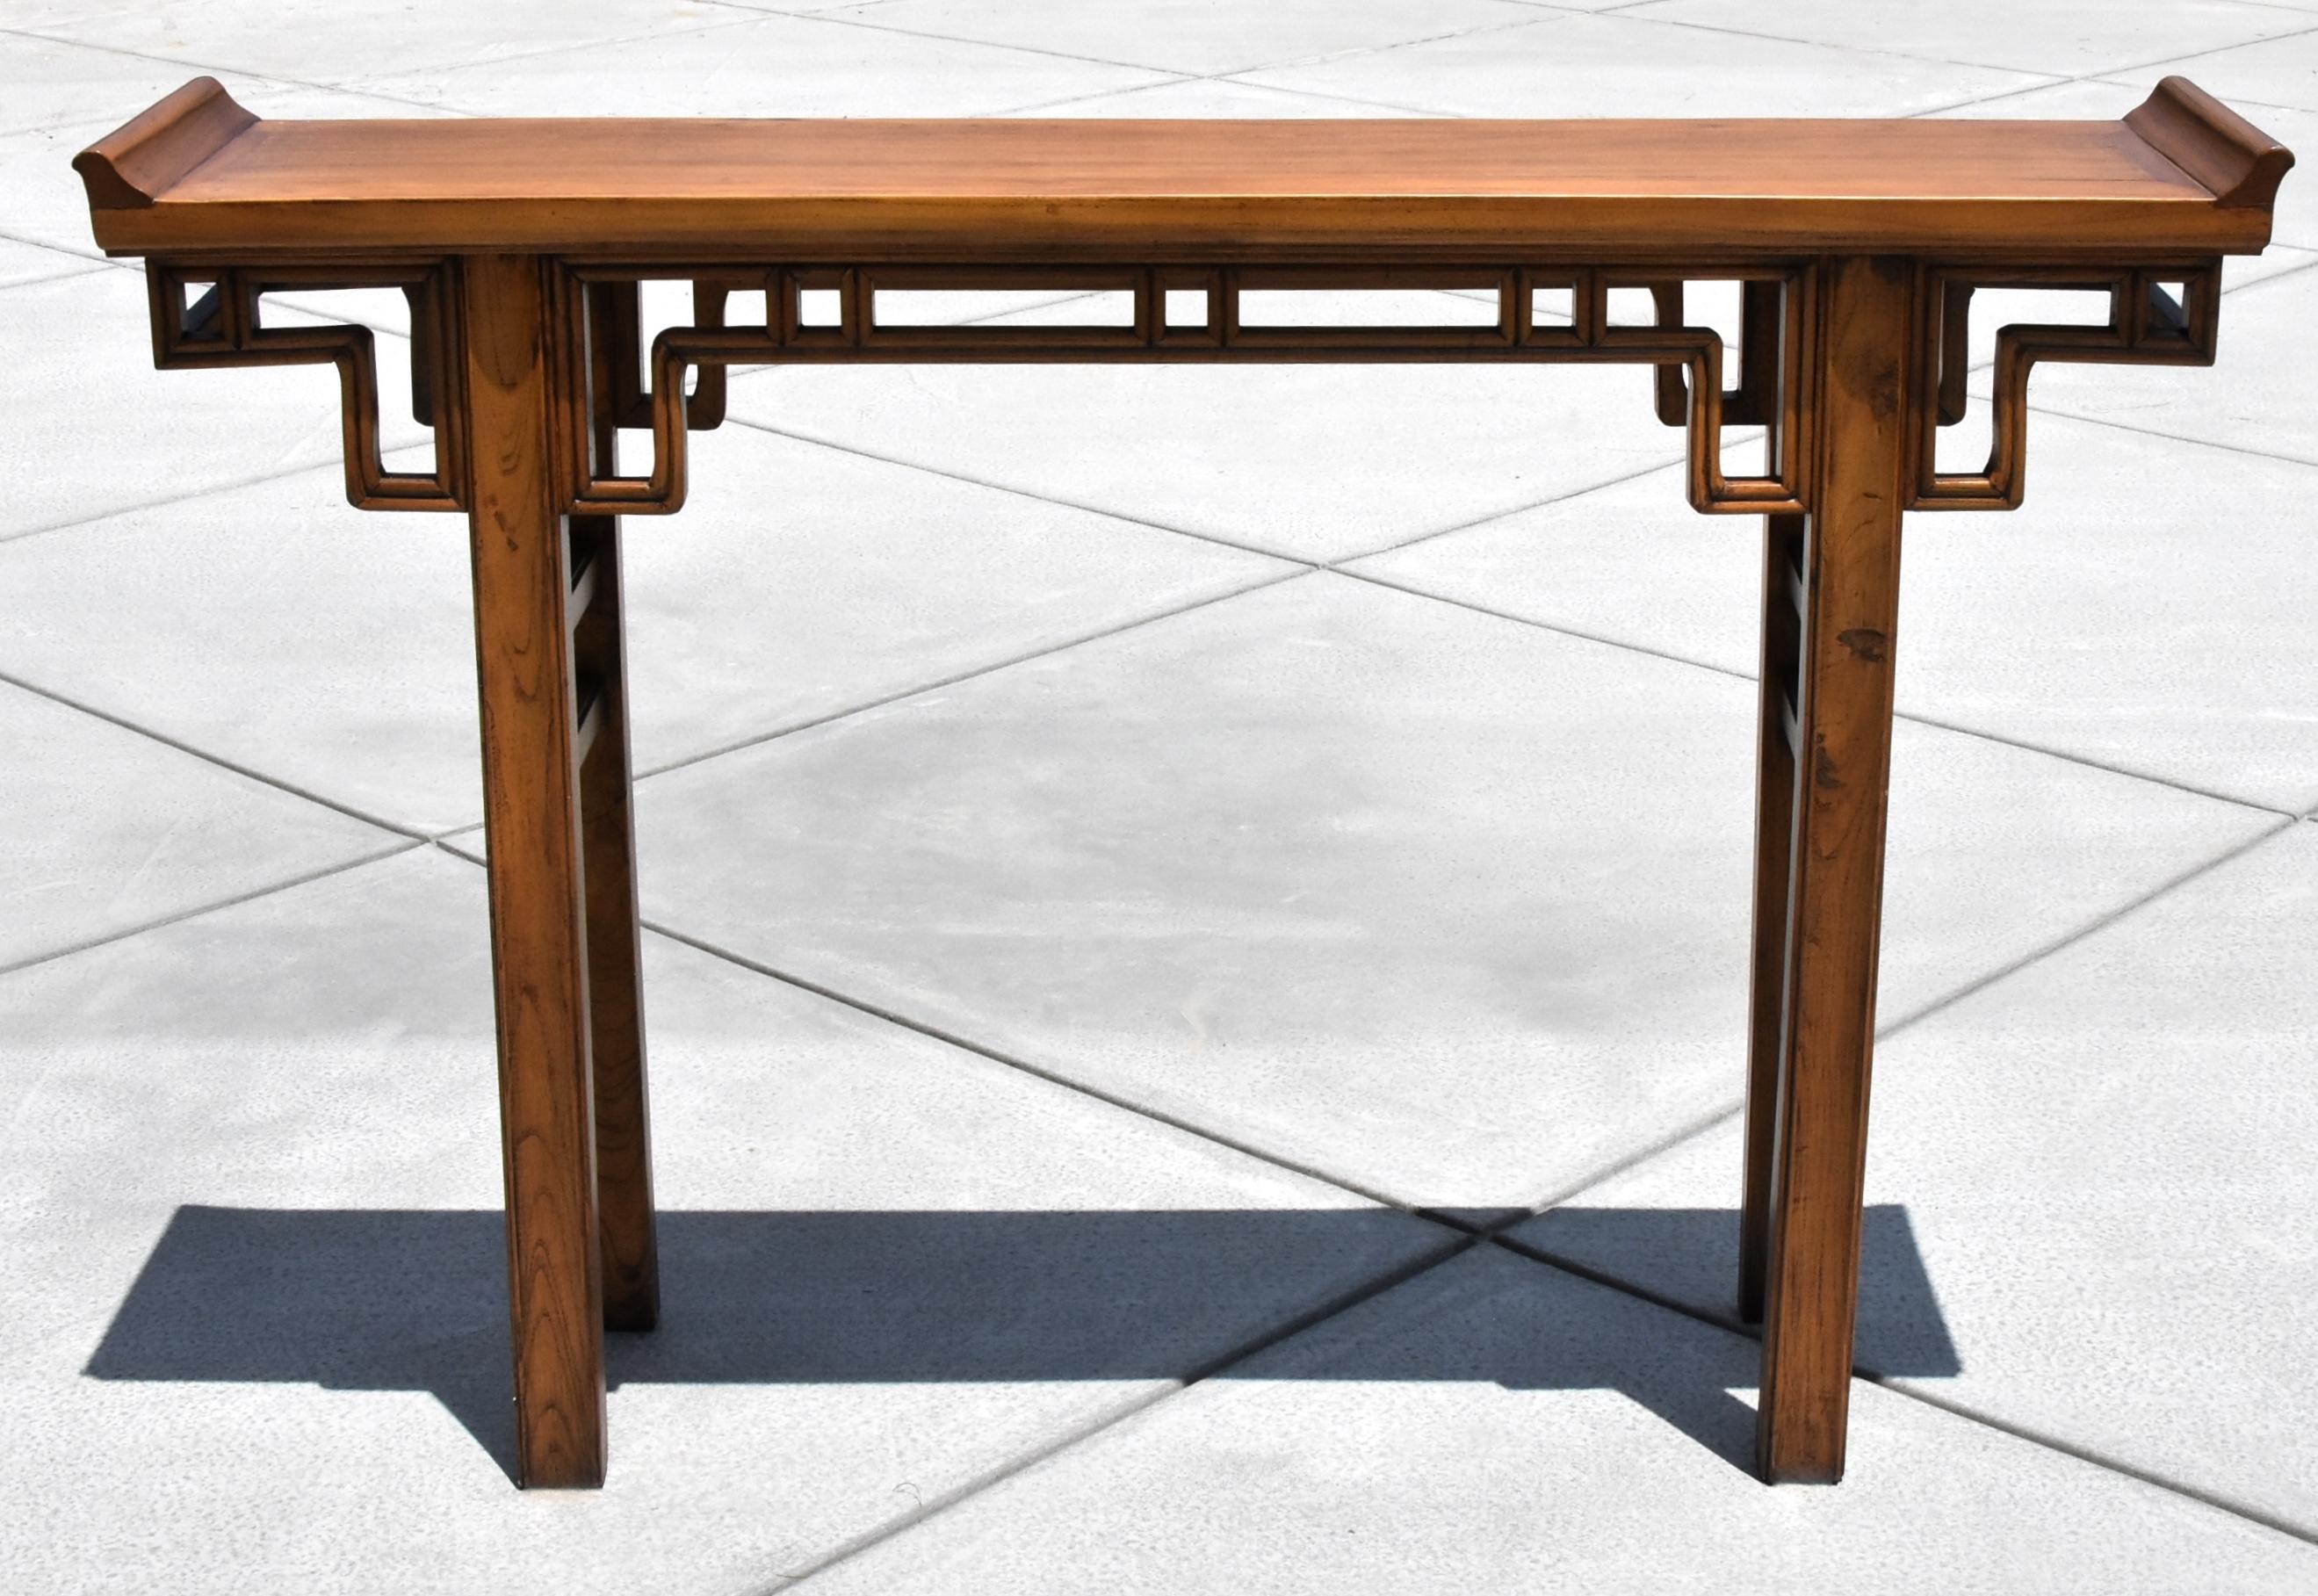 Beautiful double sided Chinese altar table. Its geometric scroll design originates from the Ming dynasty. Slightly raised flanges give the nod to the Chinese temple architecture. The choice of wood is the valued elm wood, with its graceful grains